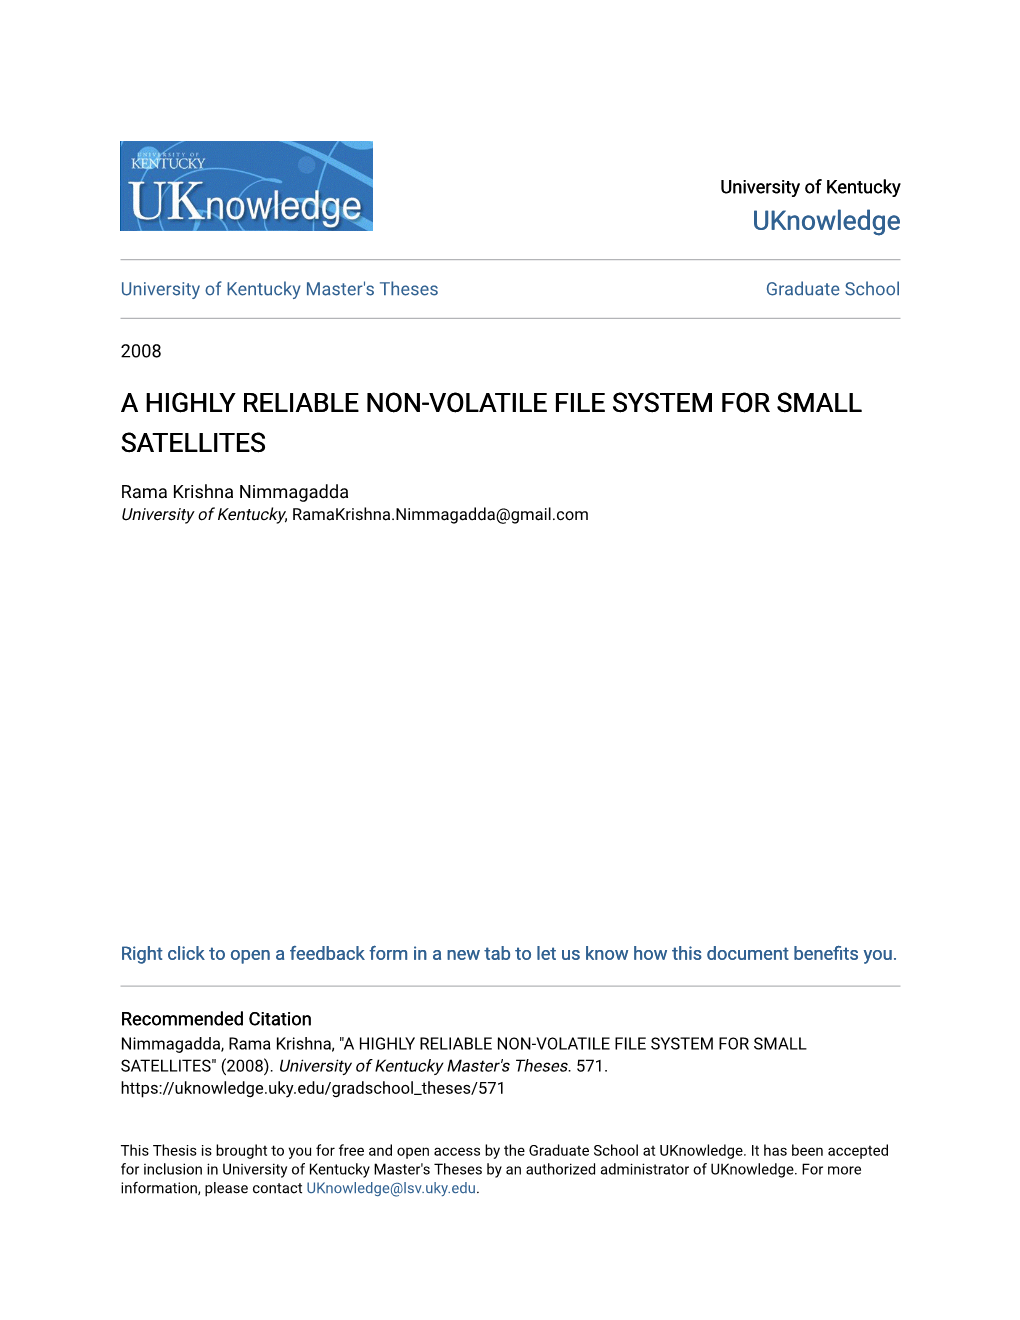 A Highly Reliable Non-Volatile File System for Small Satellites